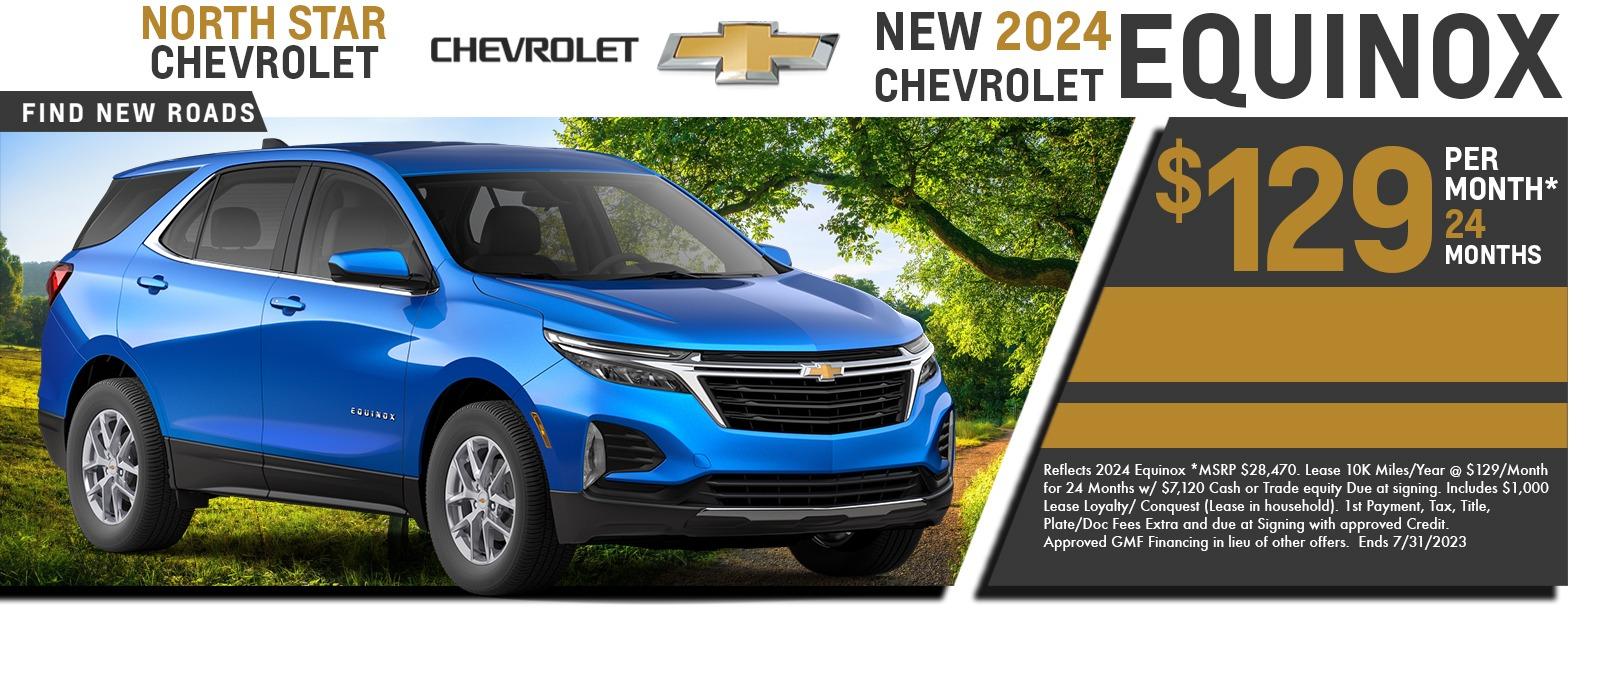 New chevy Lease Specials in PITTSBURGH Dealership North Star